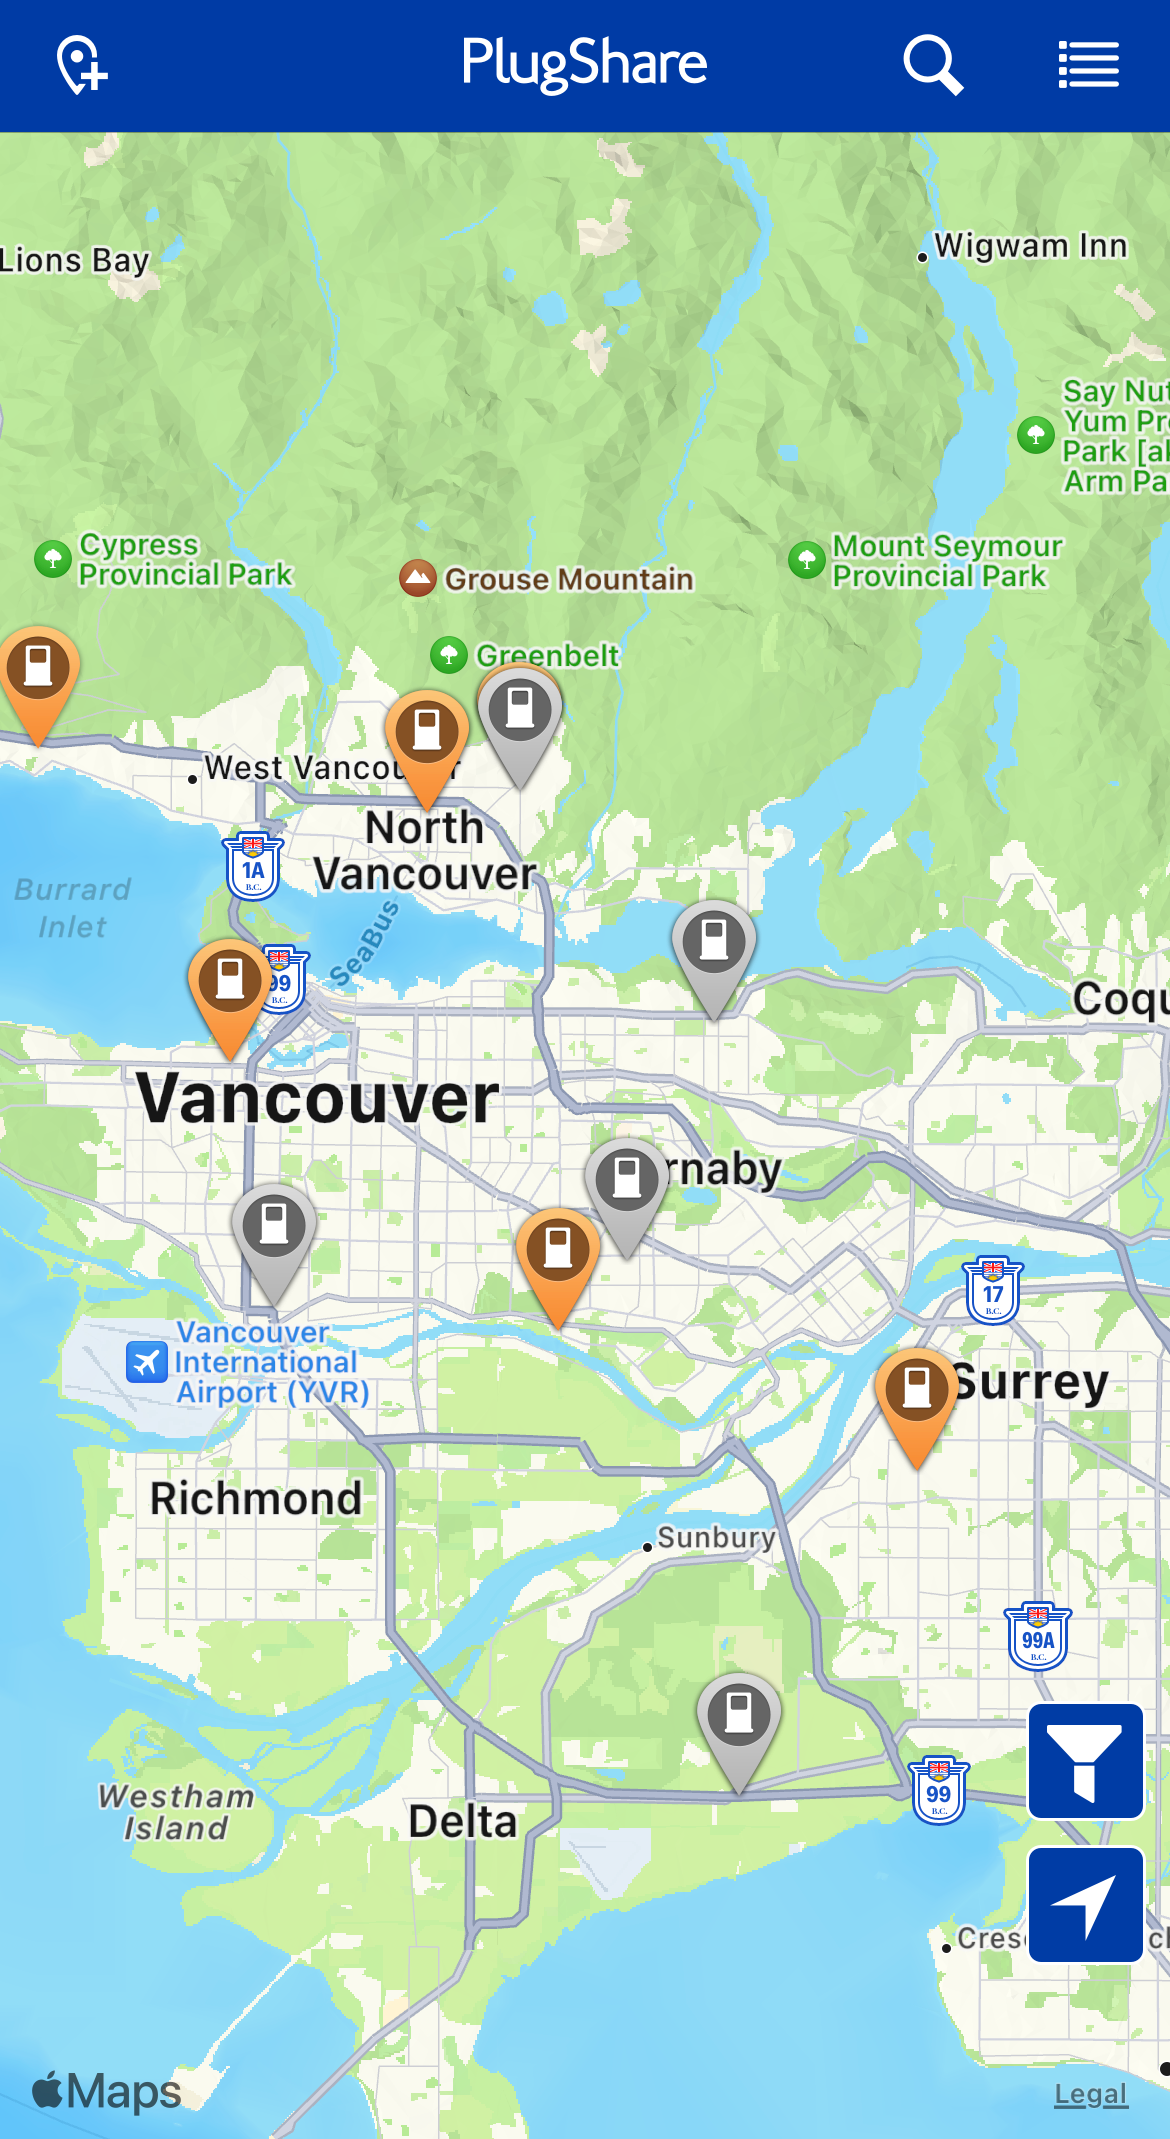 Screenshot of Plugshare showing available, compatible DC Fast Charging stations in Vancouver, BC.